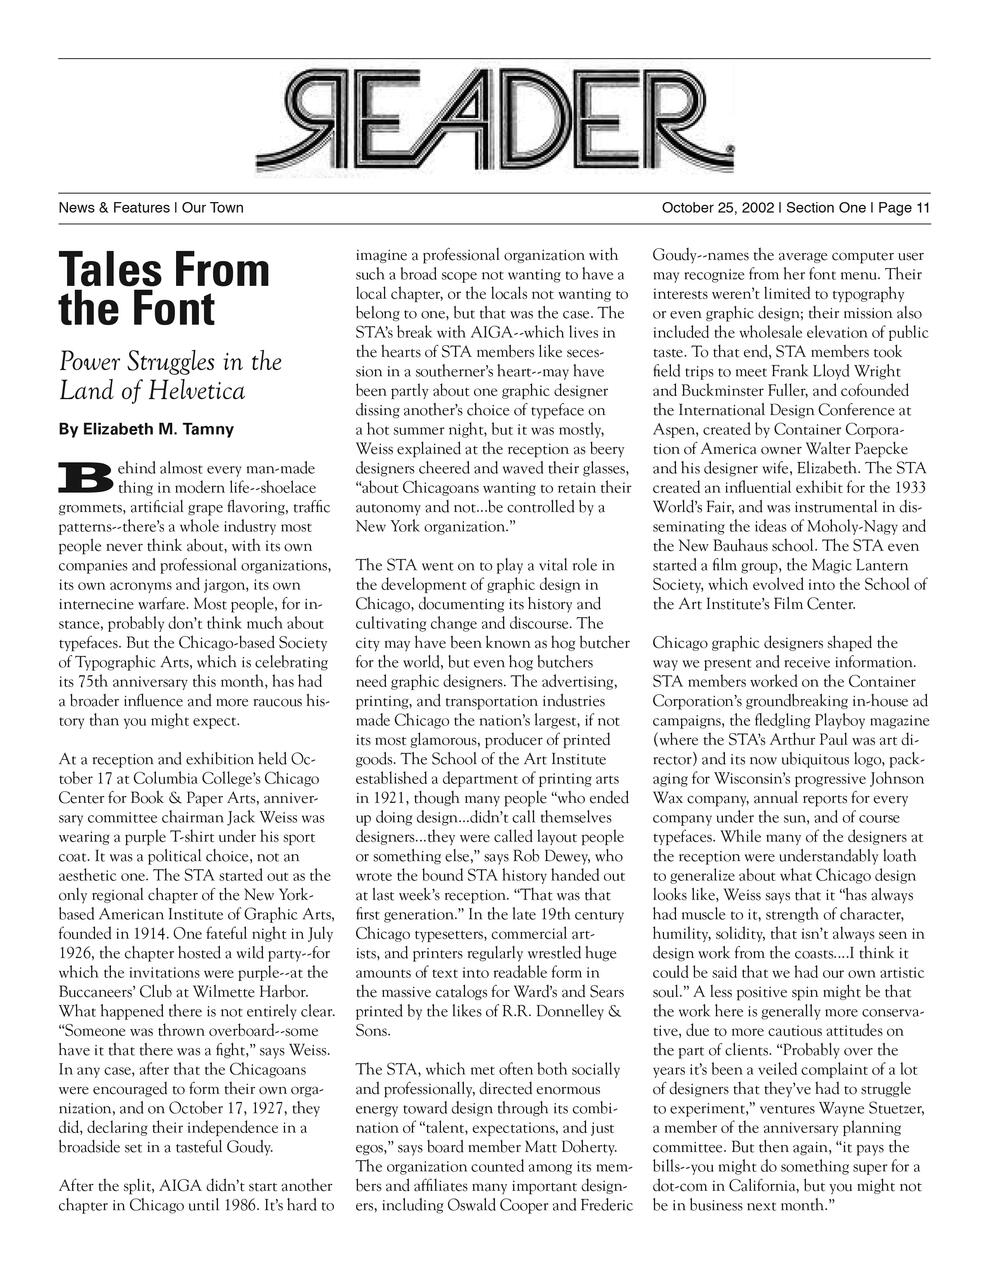 Tales From the Font